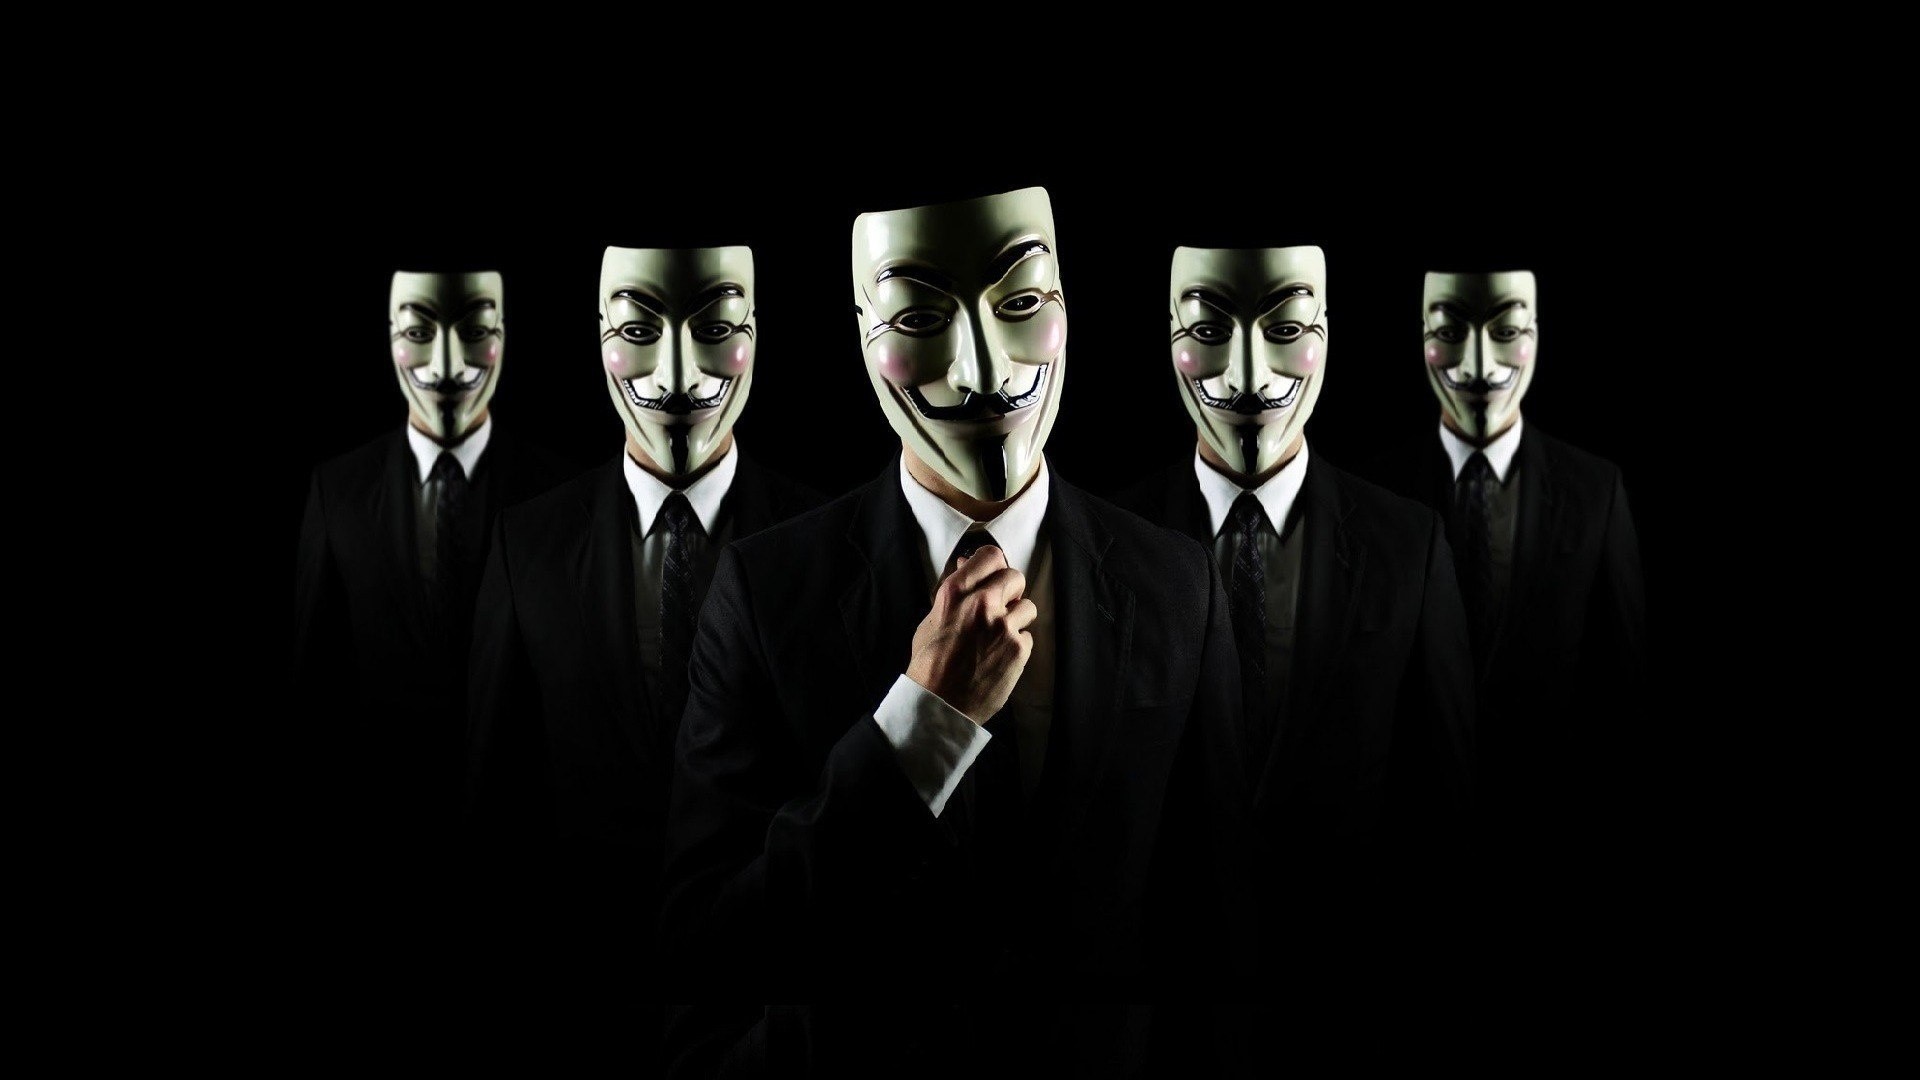 Anonymous Wallpapers Find best latest Anonymous Wallpapers in HD for your PC desktop background